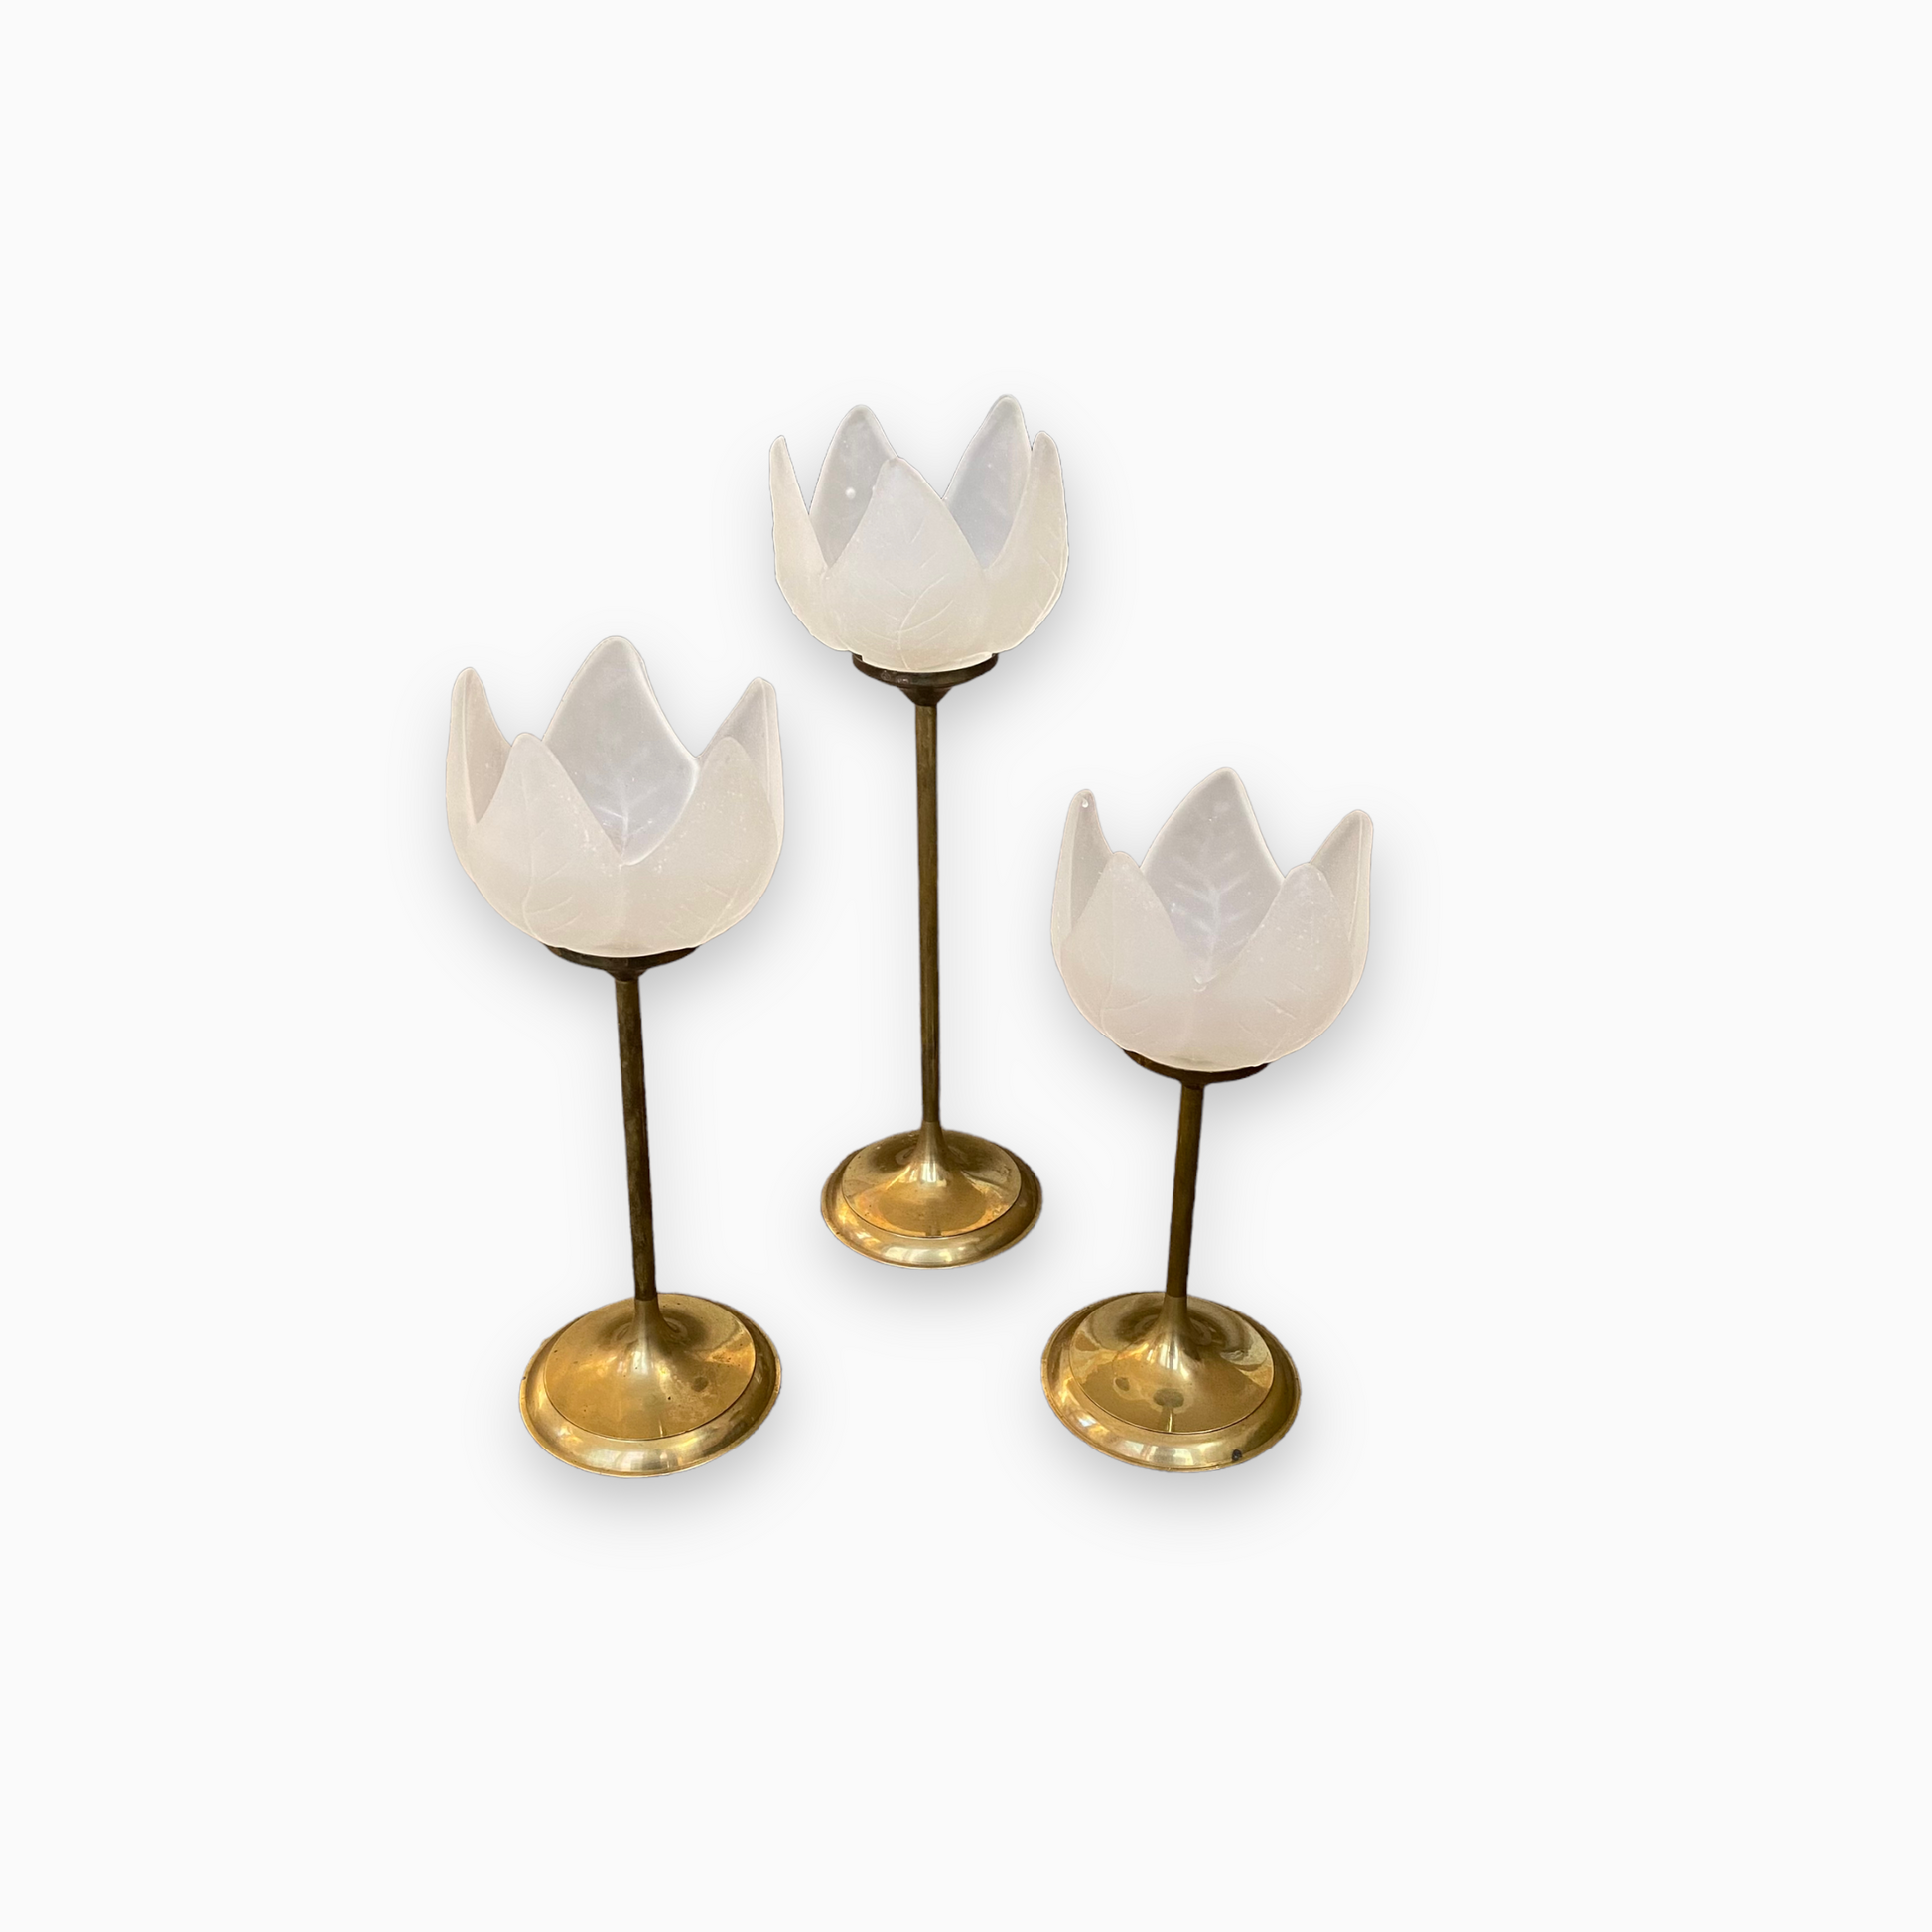 Set of Vintage Tulip Flower Candle Holders - Frosted Glass and Brass